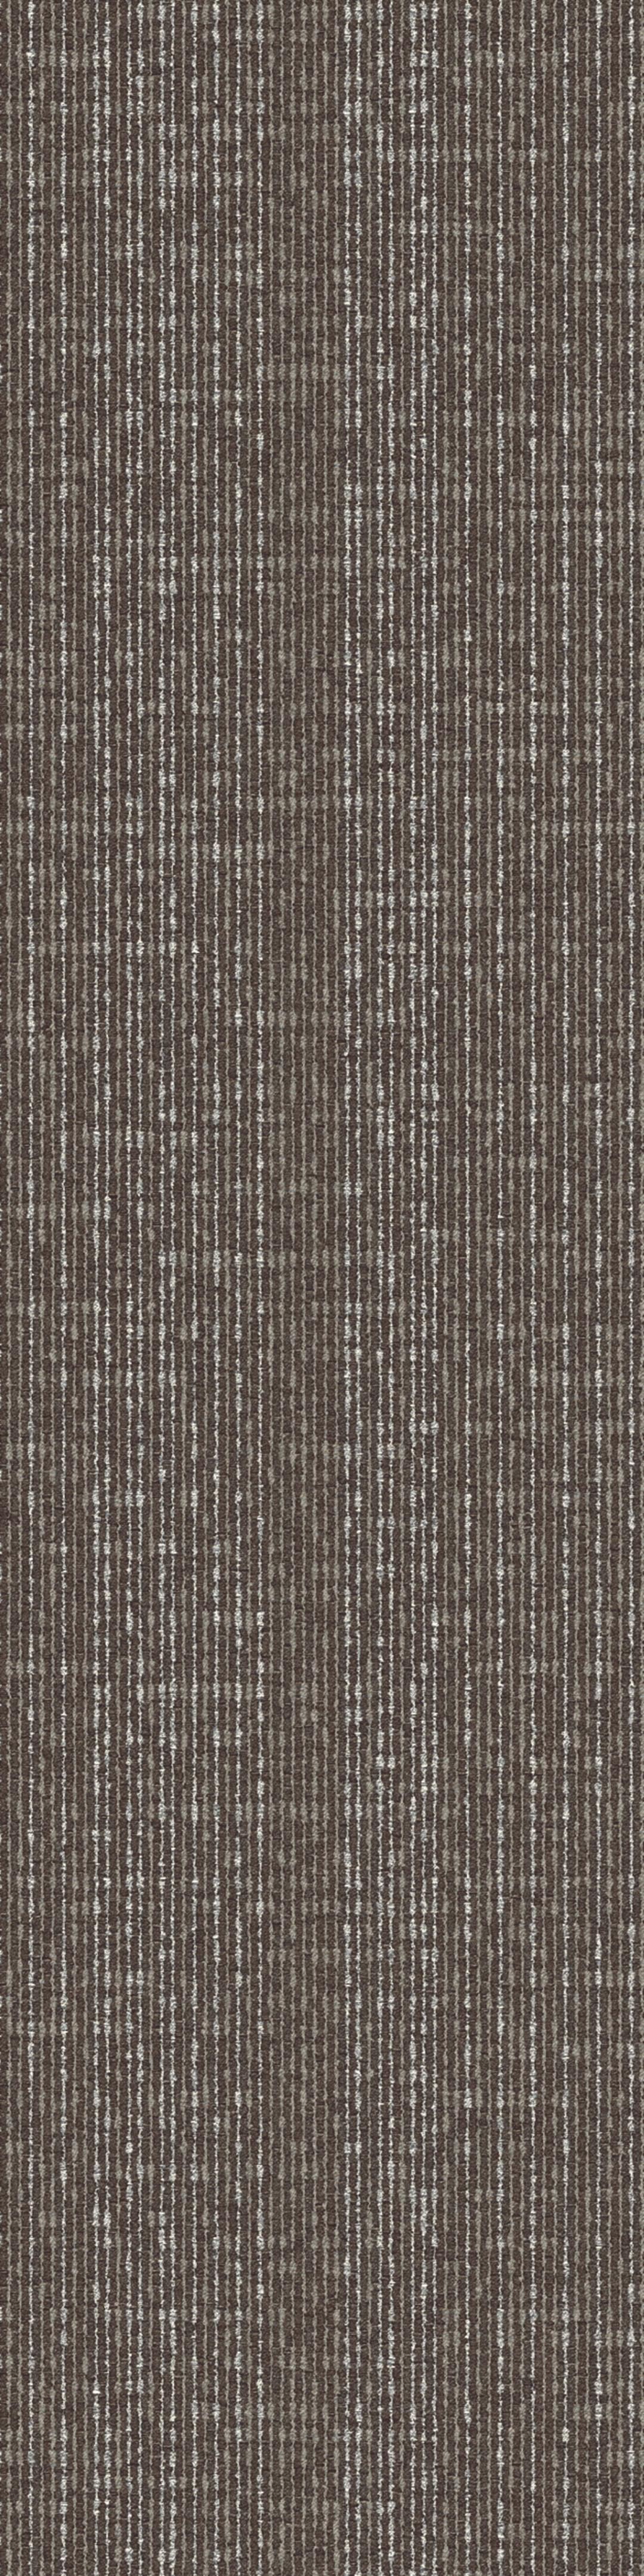 Embodied Beauty -  Shishu Stitch - Taupe from Inzide